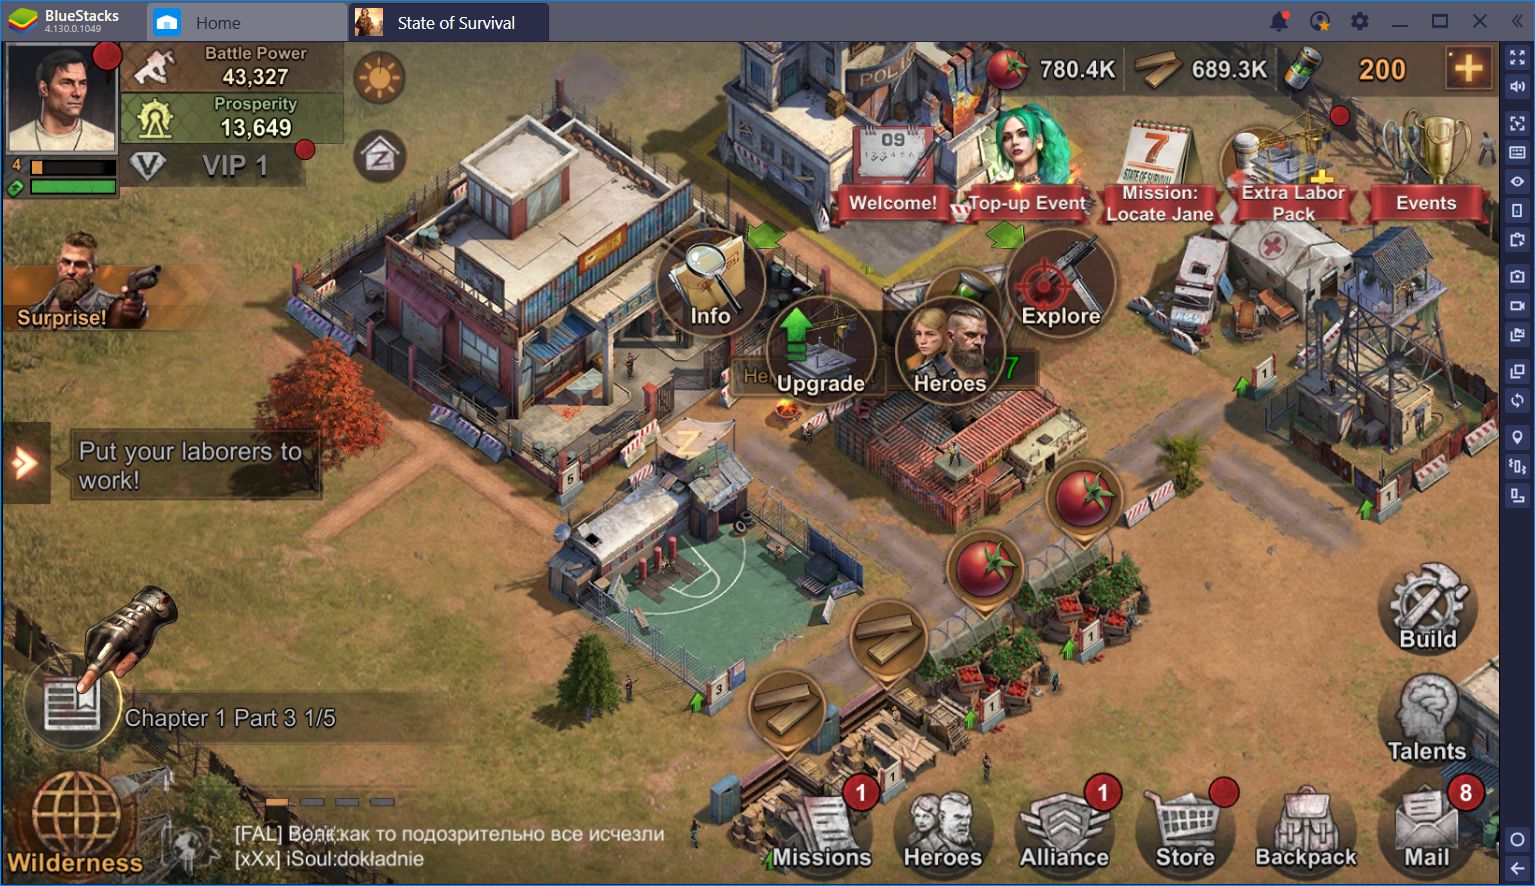 State Of Survival On Using Bluestacks To Win In This Zombie Game